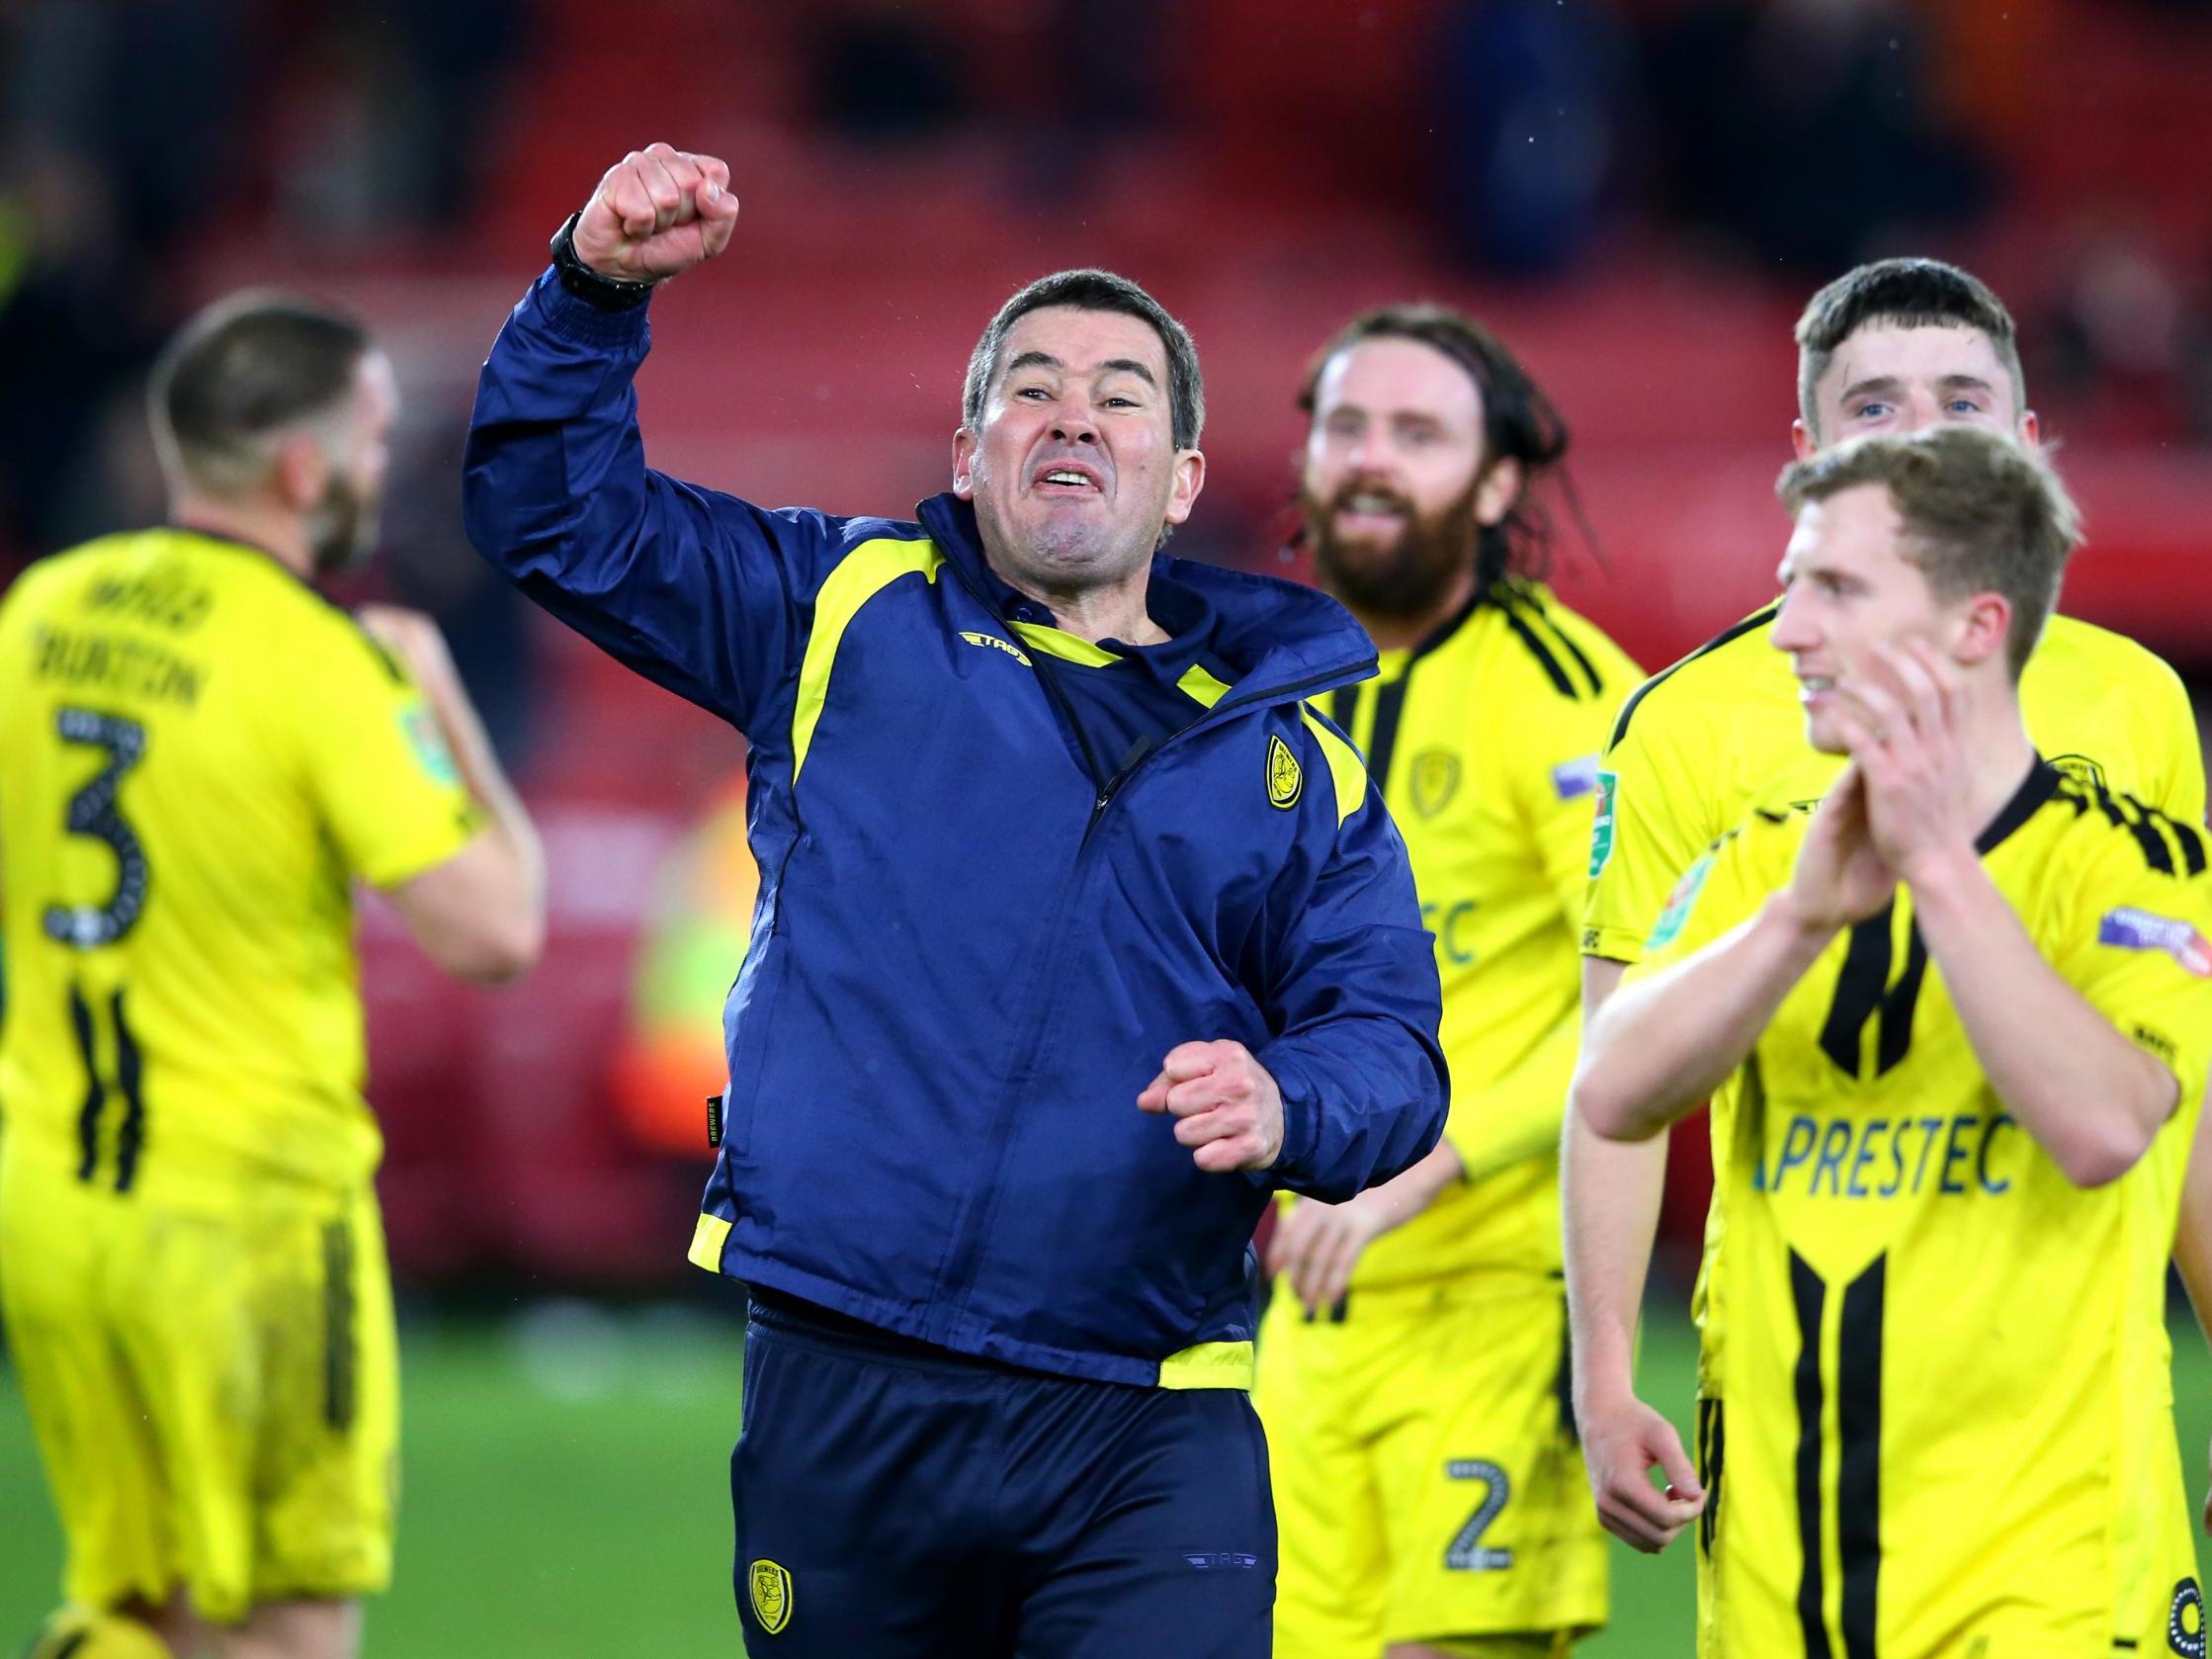 Nigel Clough celebrates his side's victory over Middlesbrough